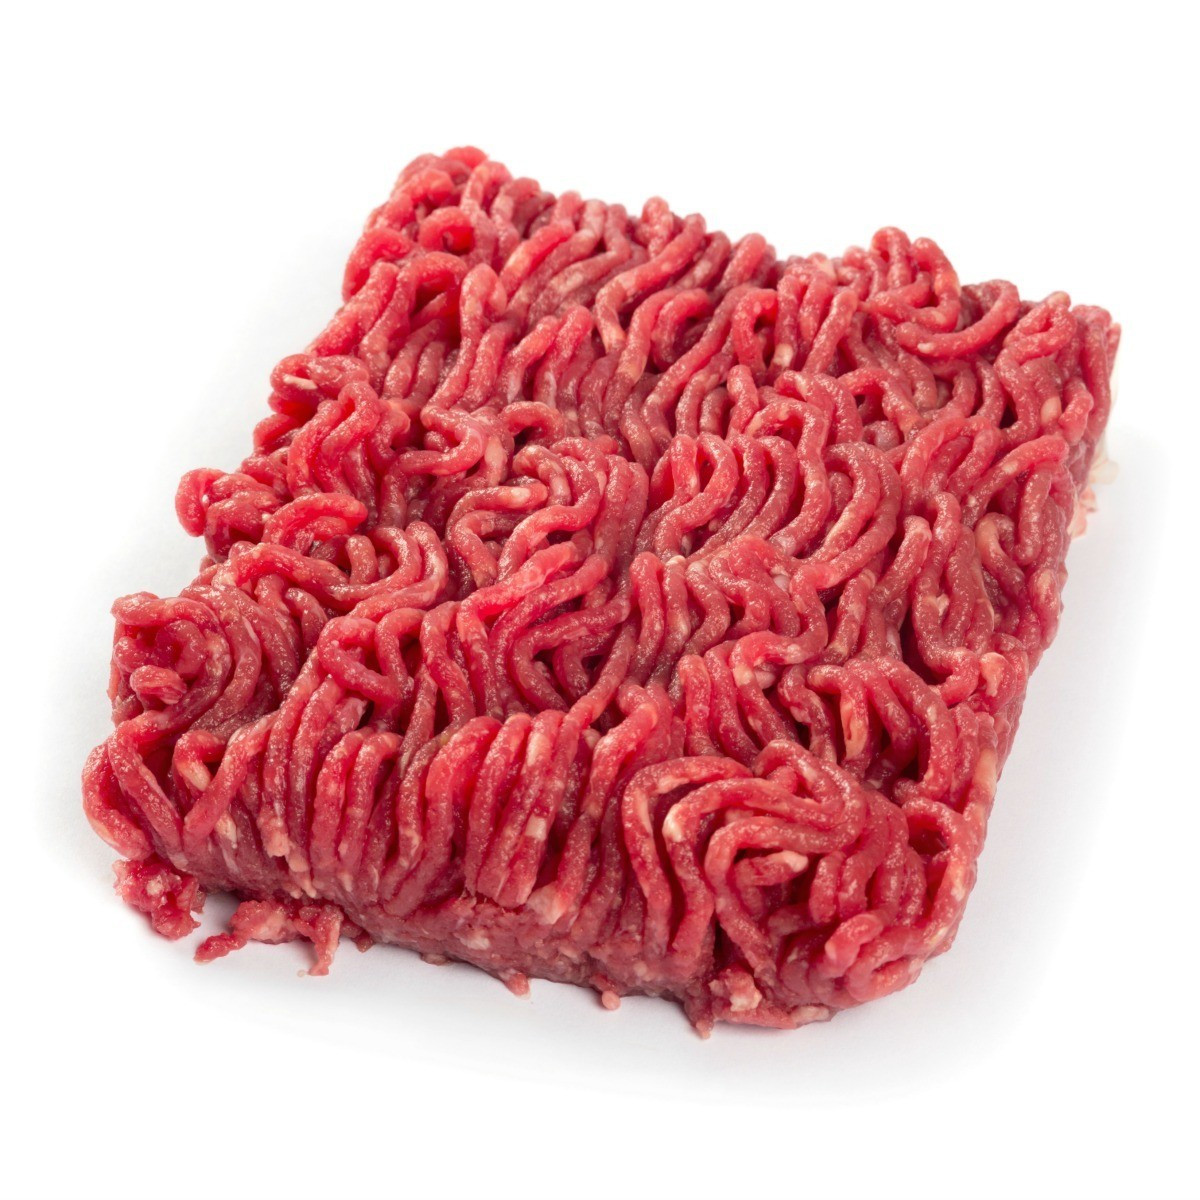 Microwave Ground Beef
 Cooking Ground Beef in the Microwave